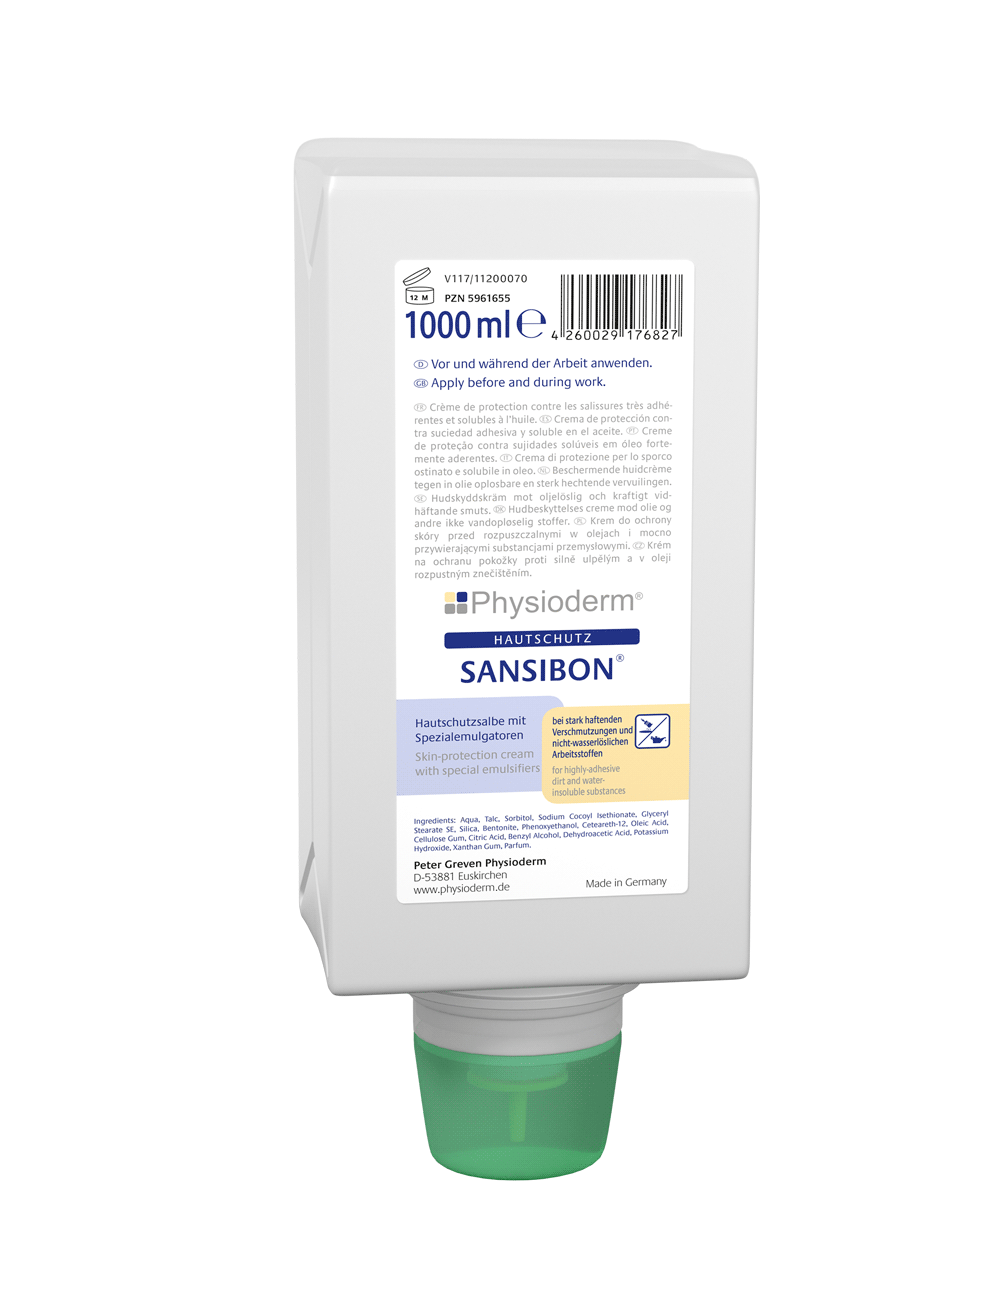  Phyioderm Sansibon 1000ML (Heavy Dirt), Highly adhesive dirt, Skin protection